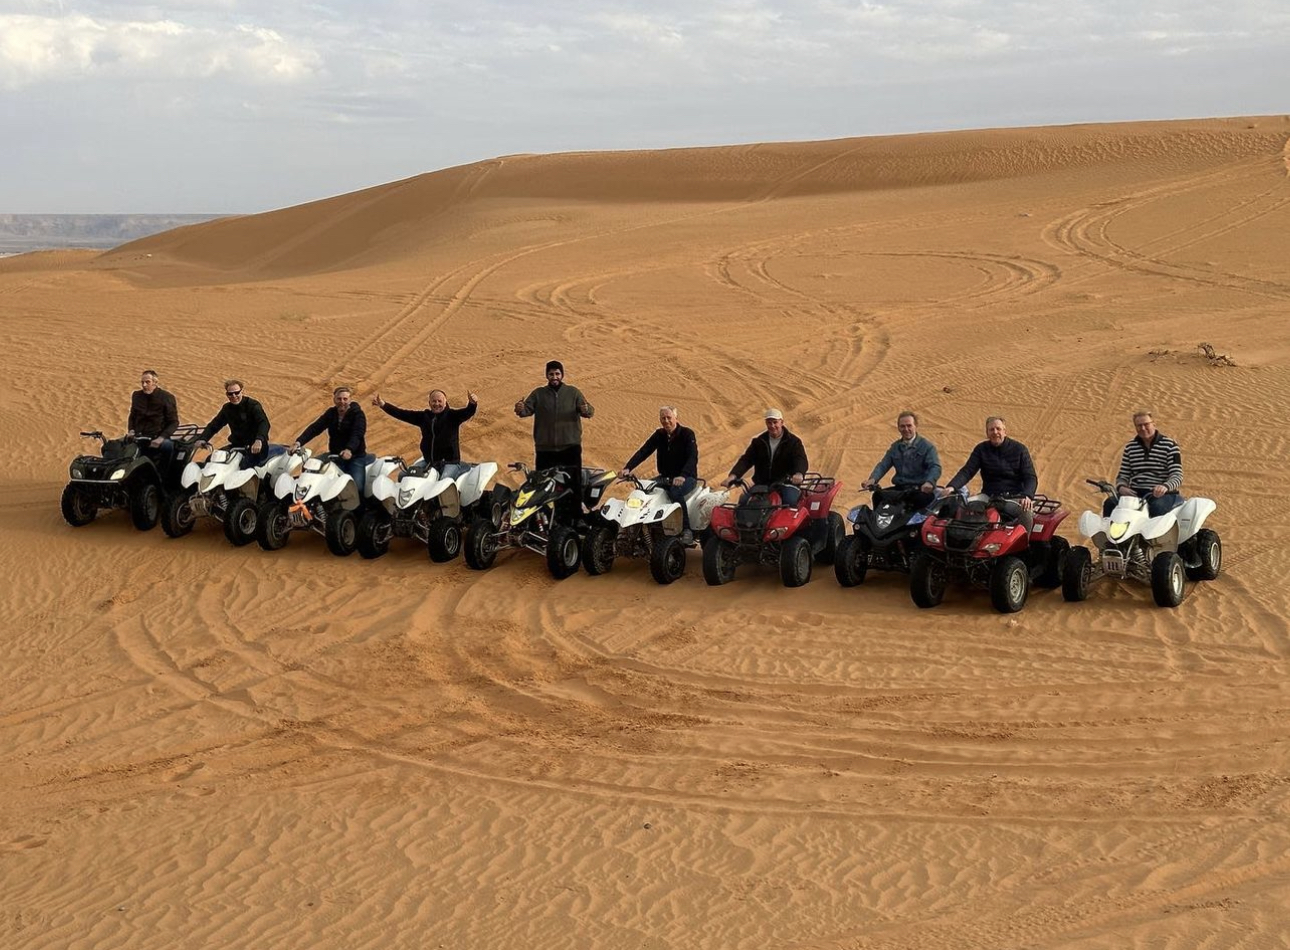 Red Sand Dunes Trip